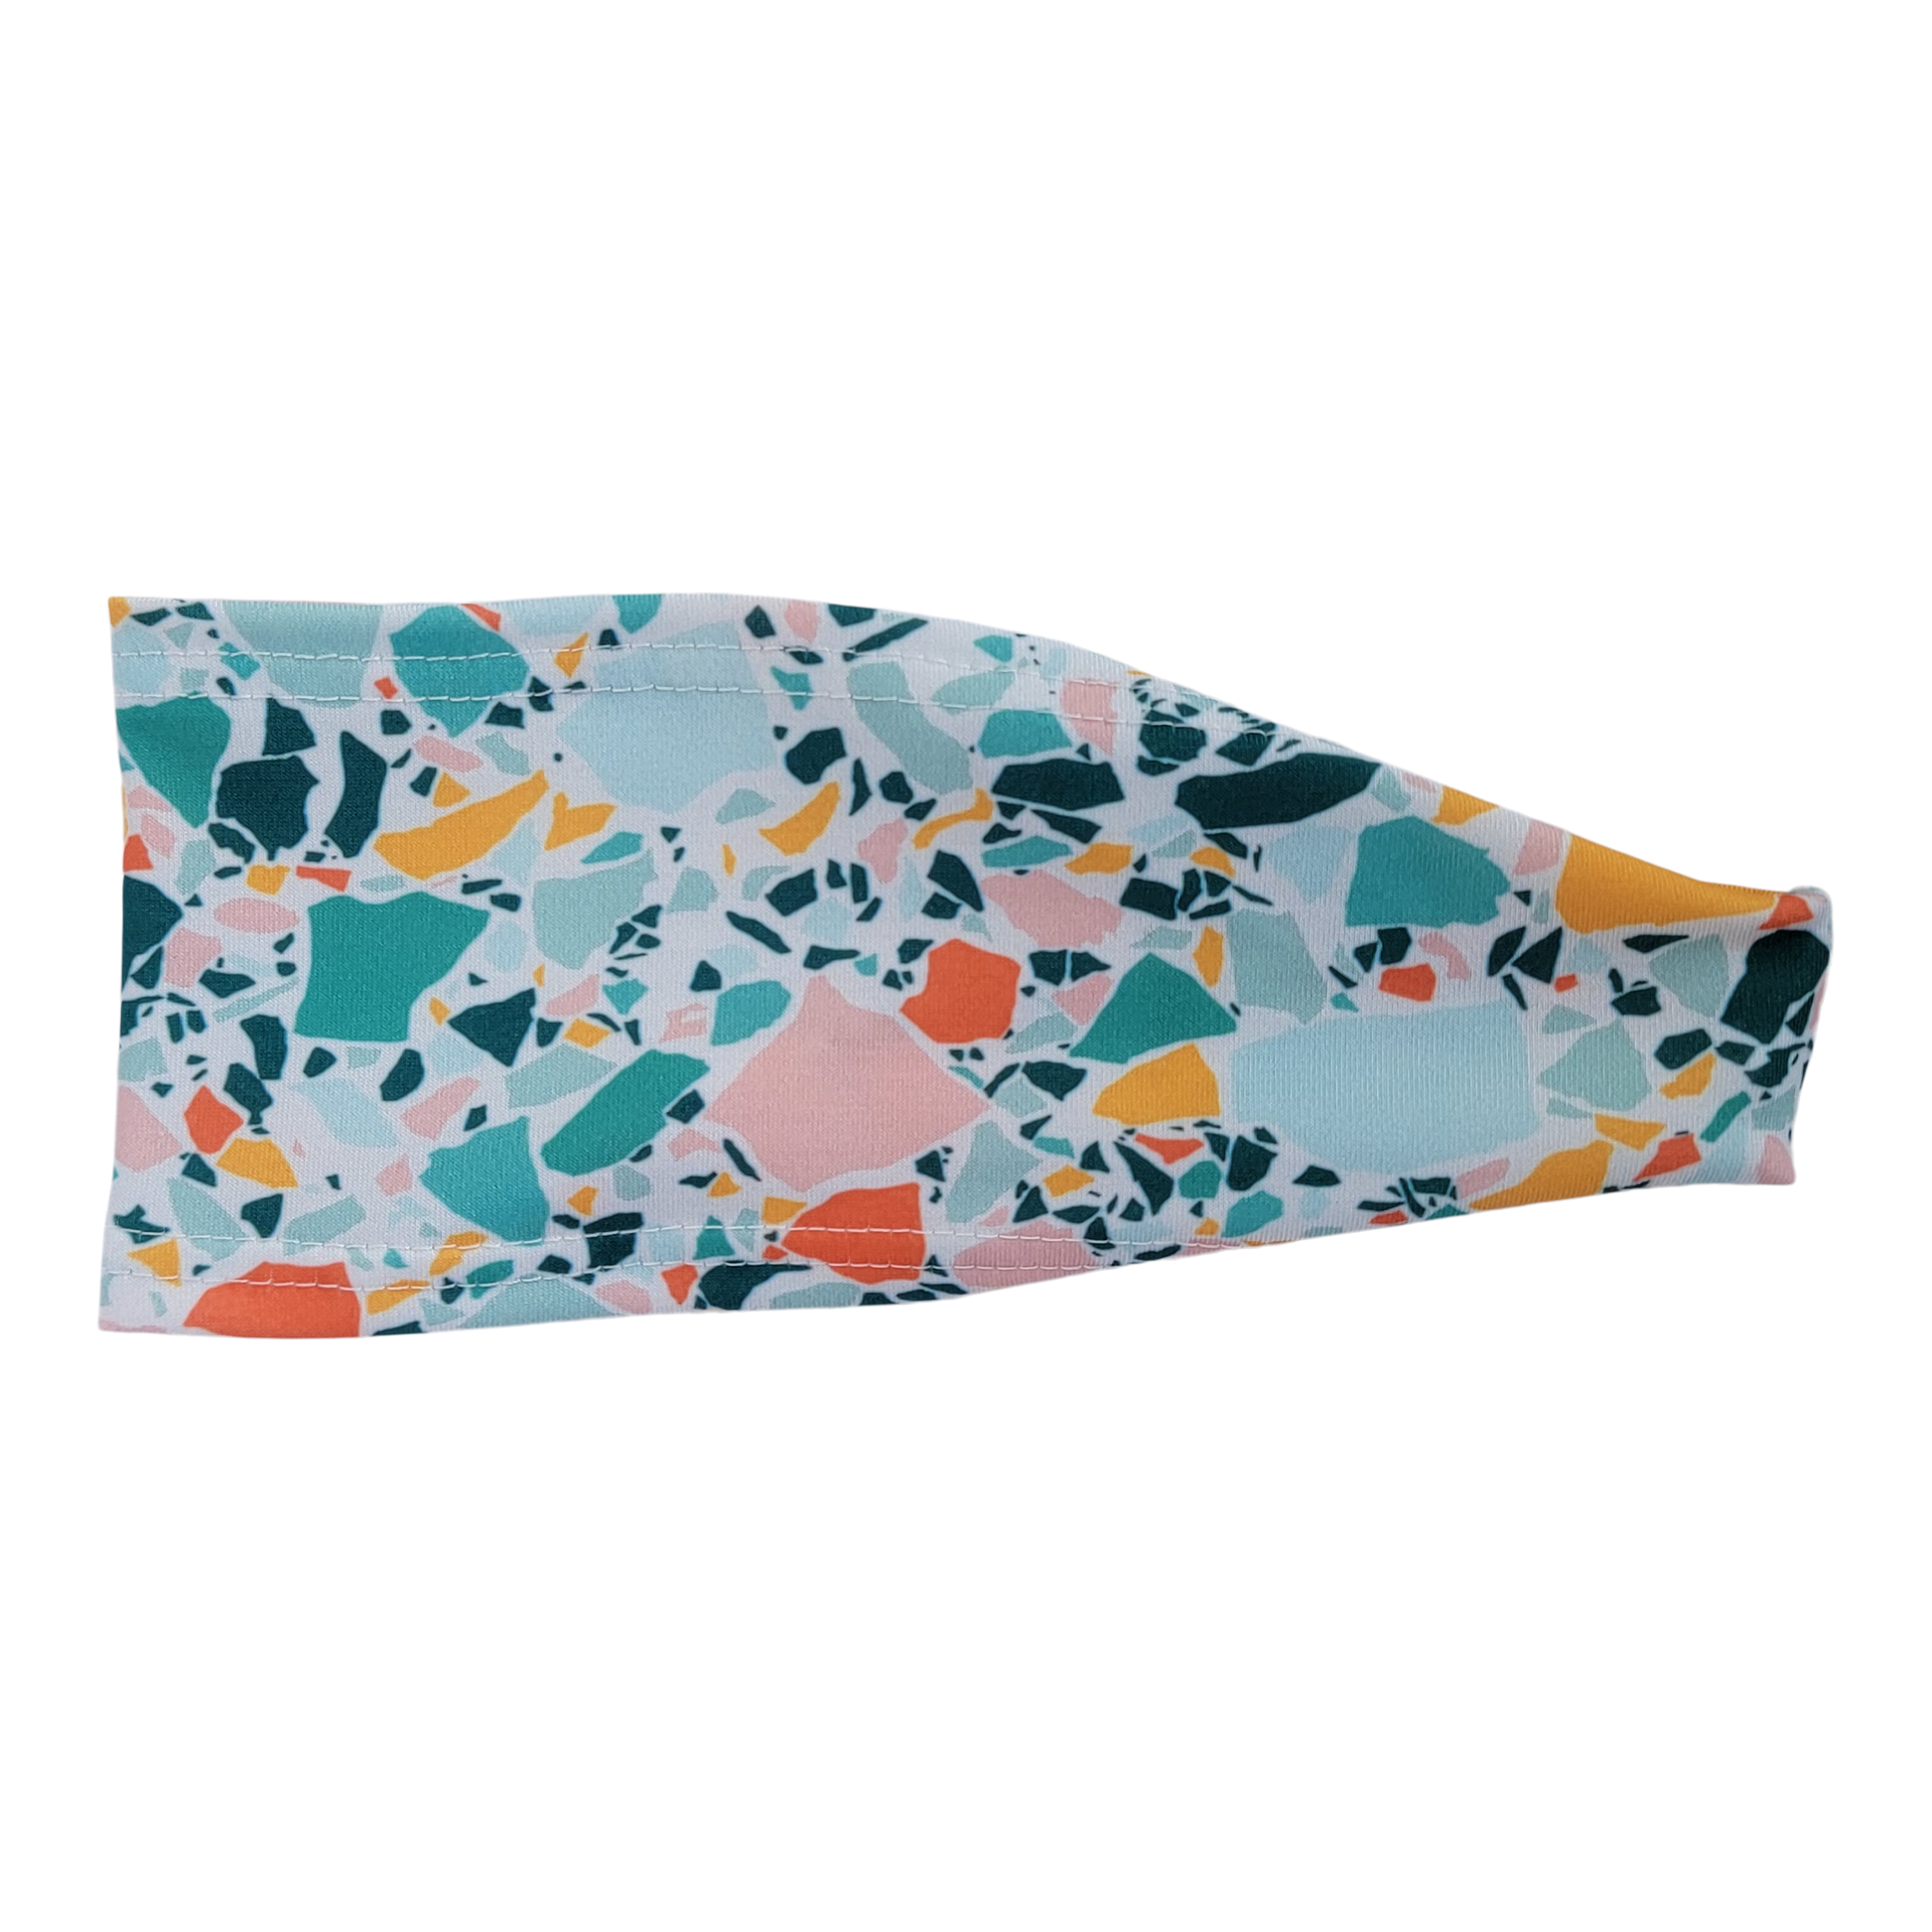 teal green pink orange abstract shapes on white